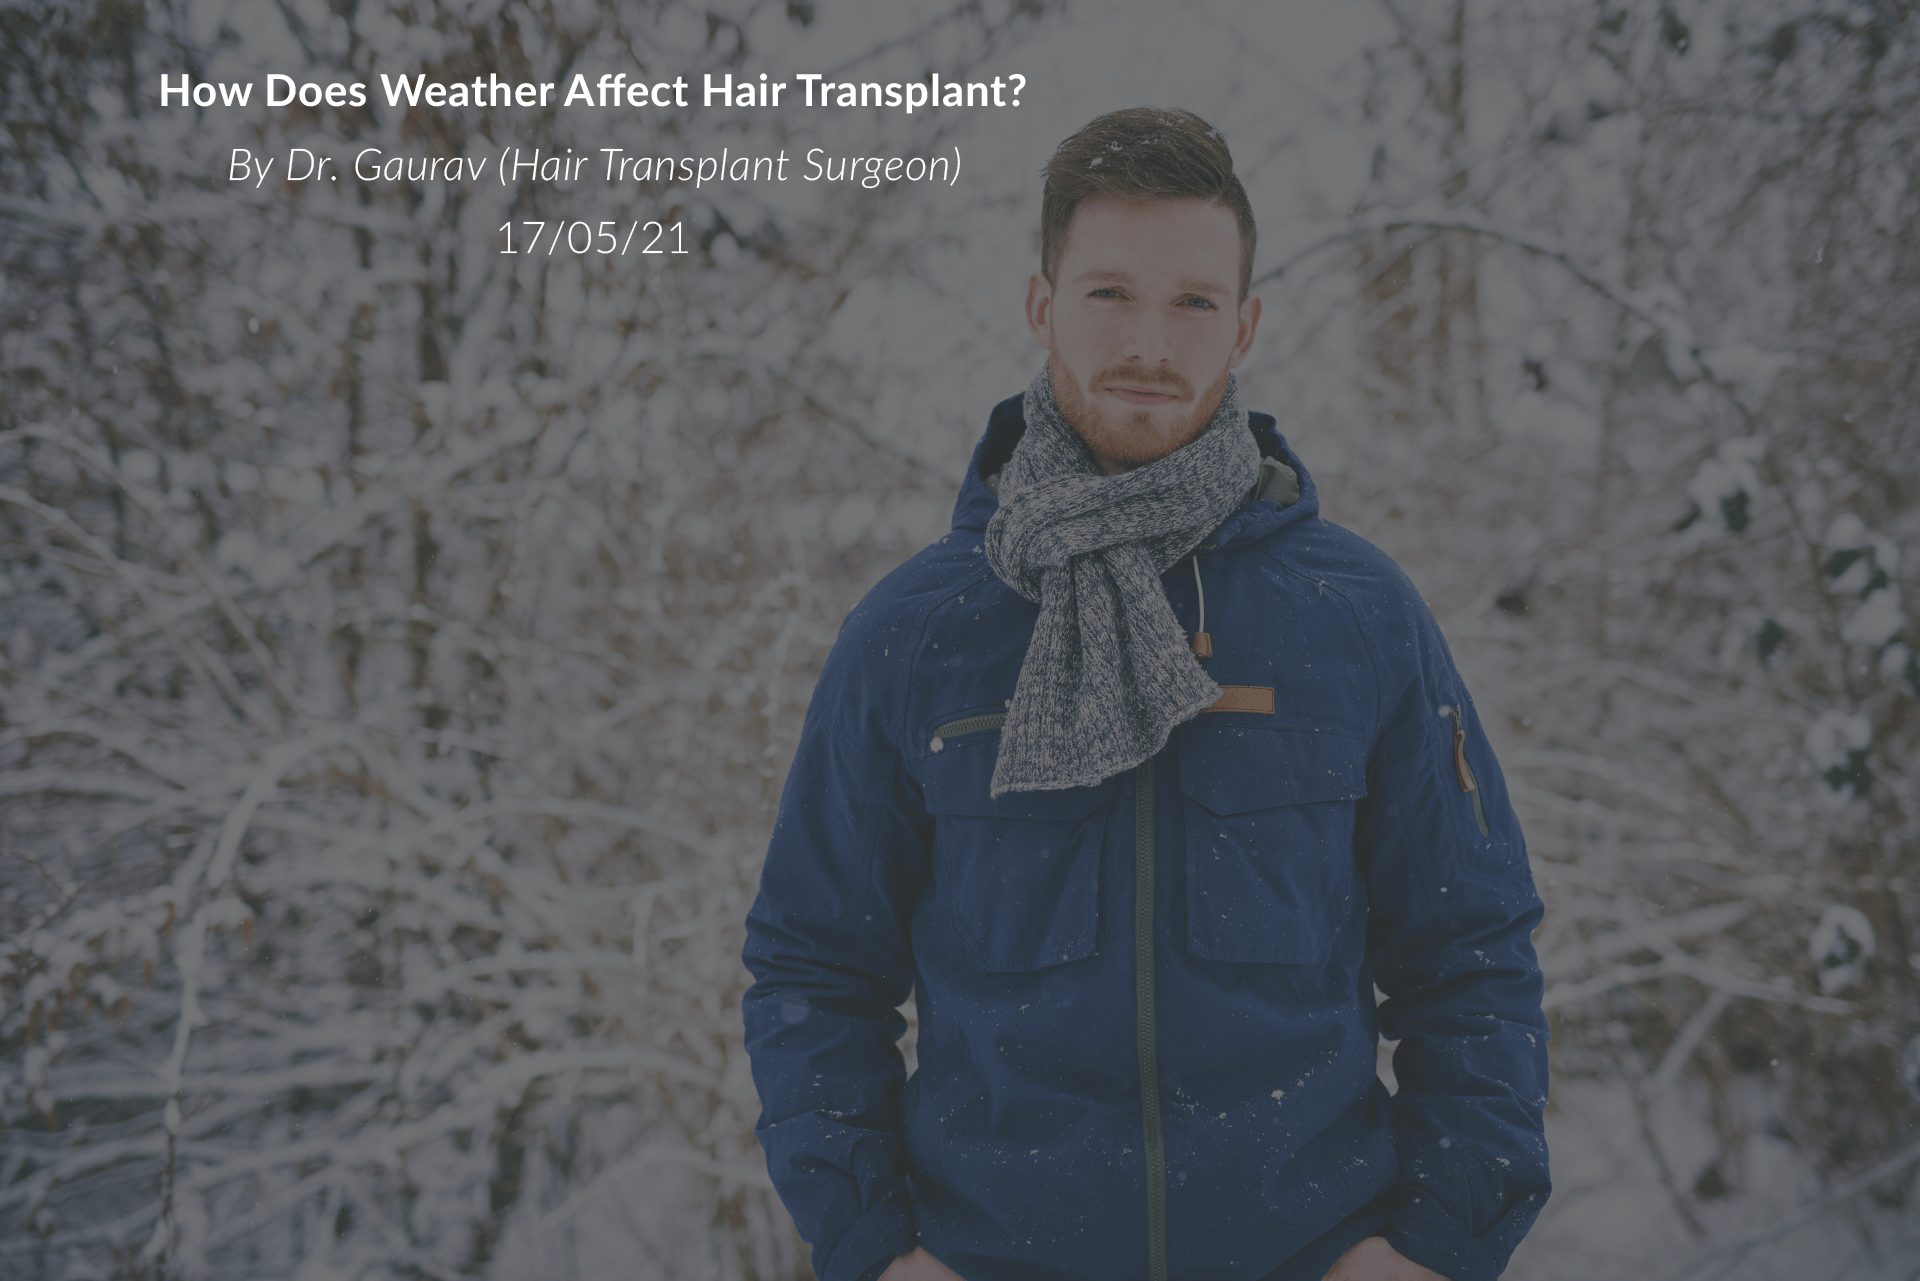 How Does Weather Affect Hair Transplant?